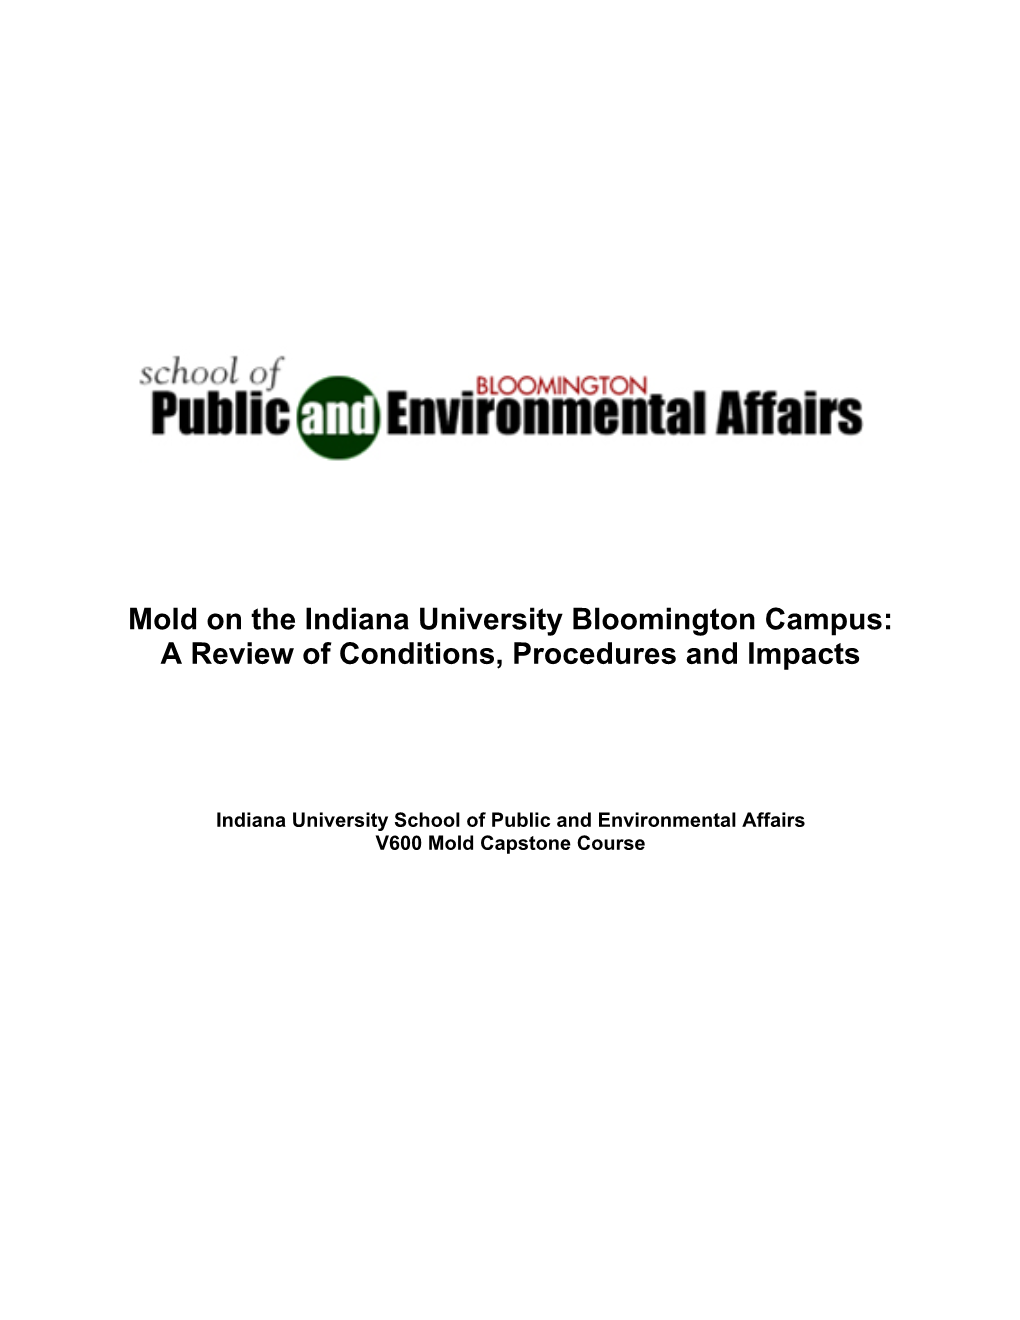 Mold on the Indiana University Bloomington Campus: a Review of Conditions, Procedures and Impacts